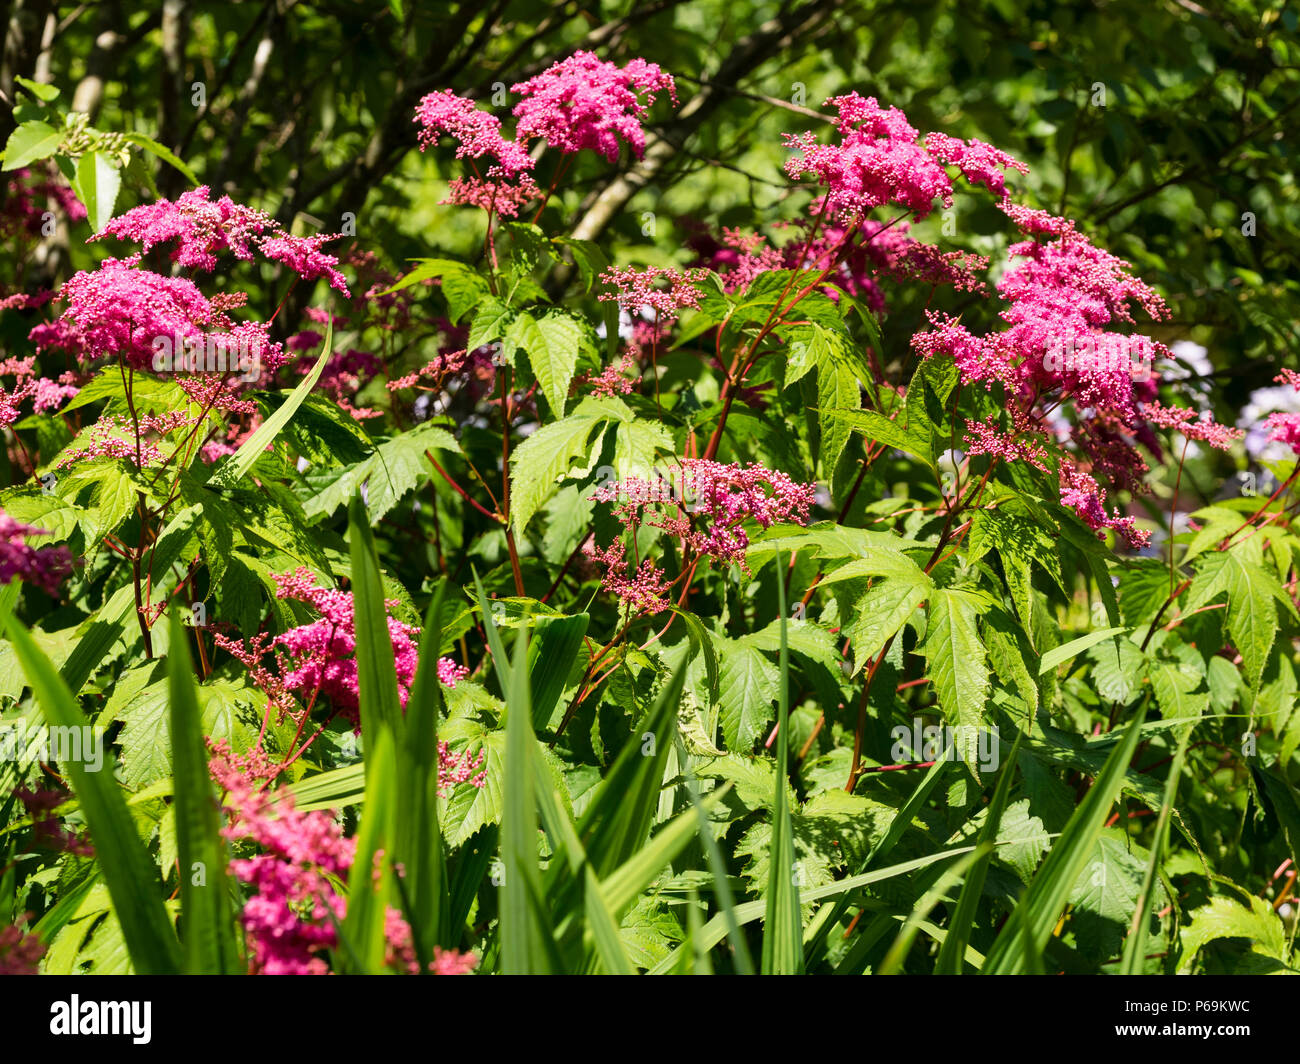 Frothy heads of red-pink summer flowers of the perennial meadowsweet, Filipendula palmata Rubra Stock Photo